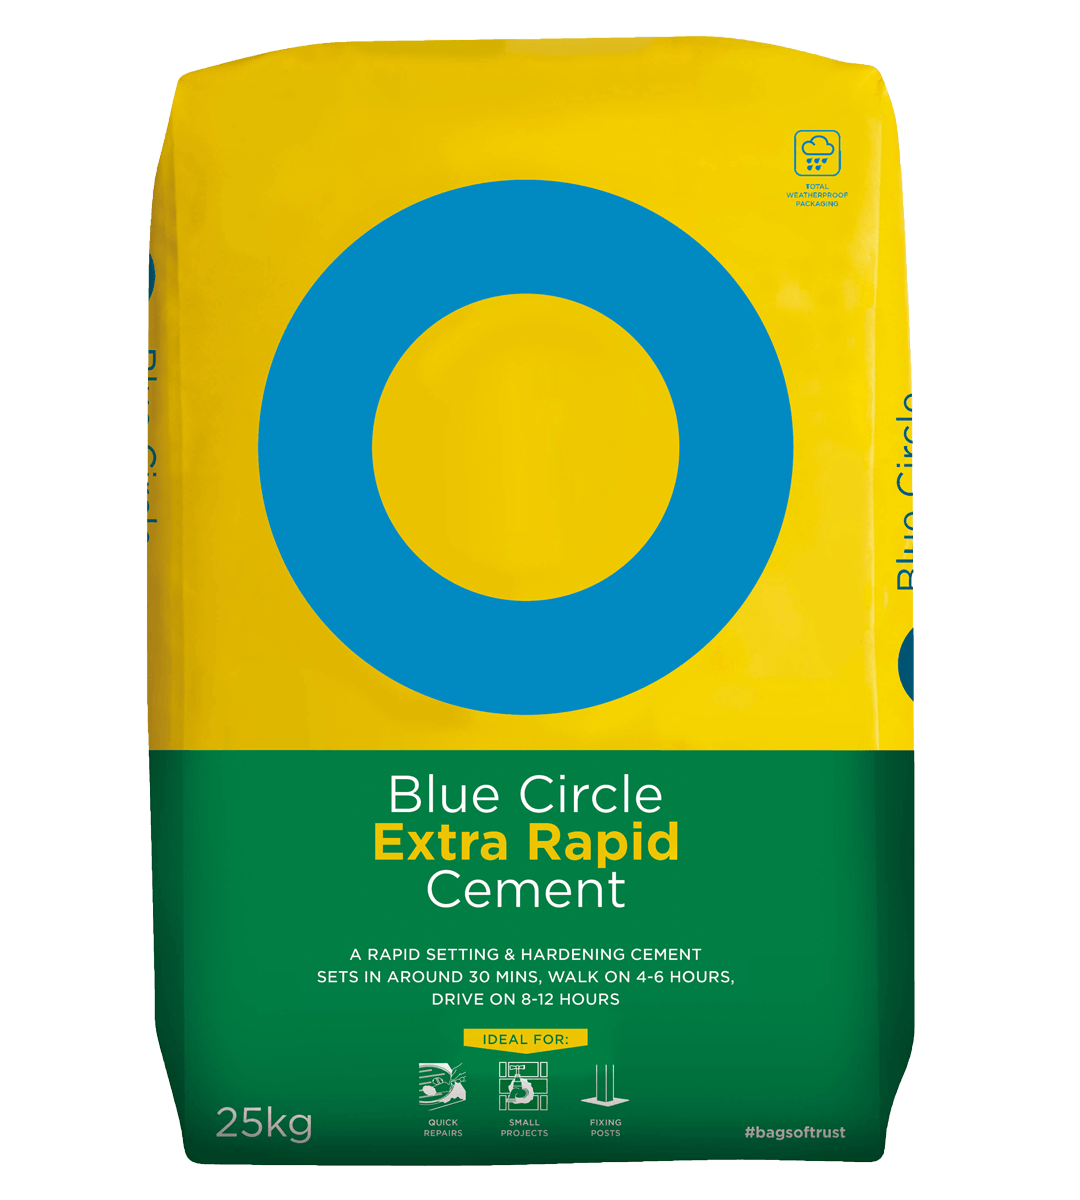 White and Blue Circle Company Logo - Blue Circle Cement for building trades